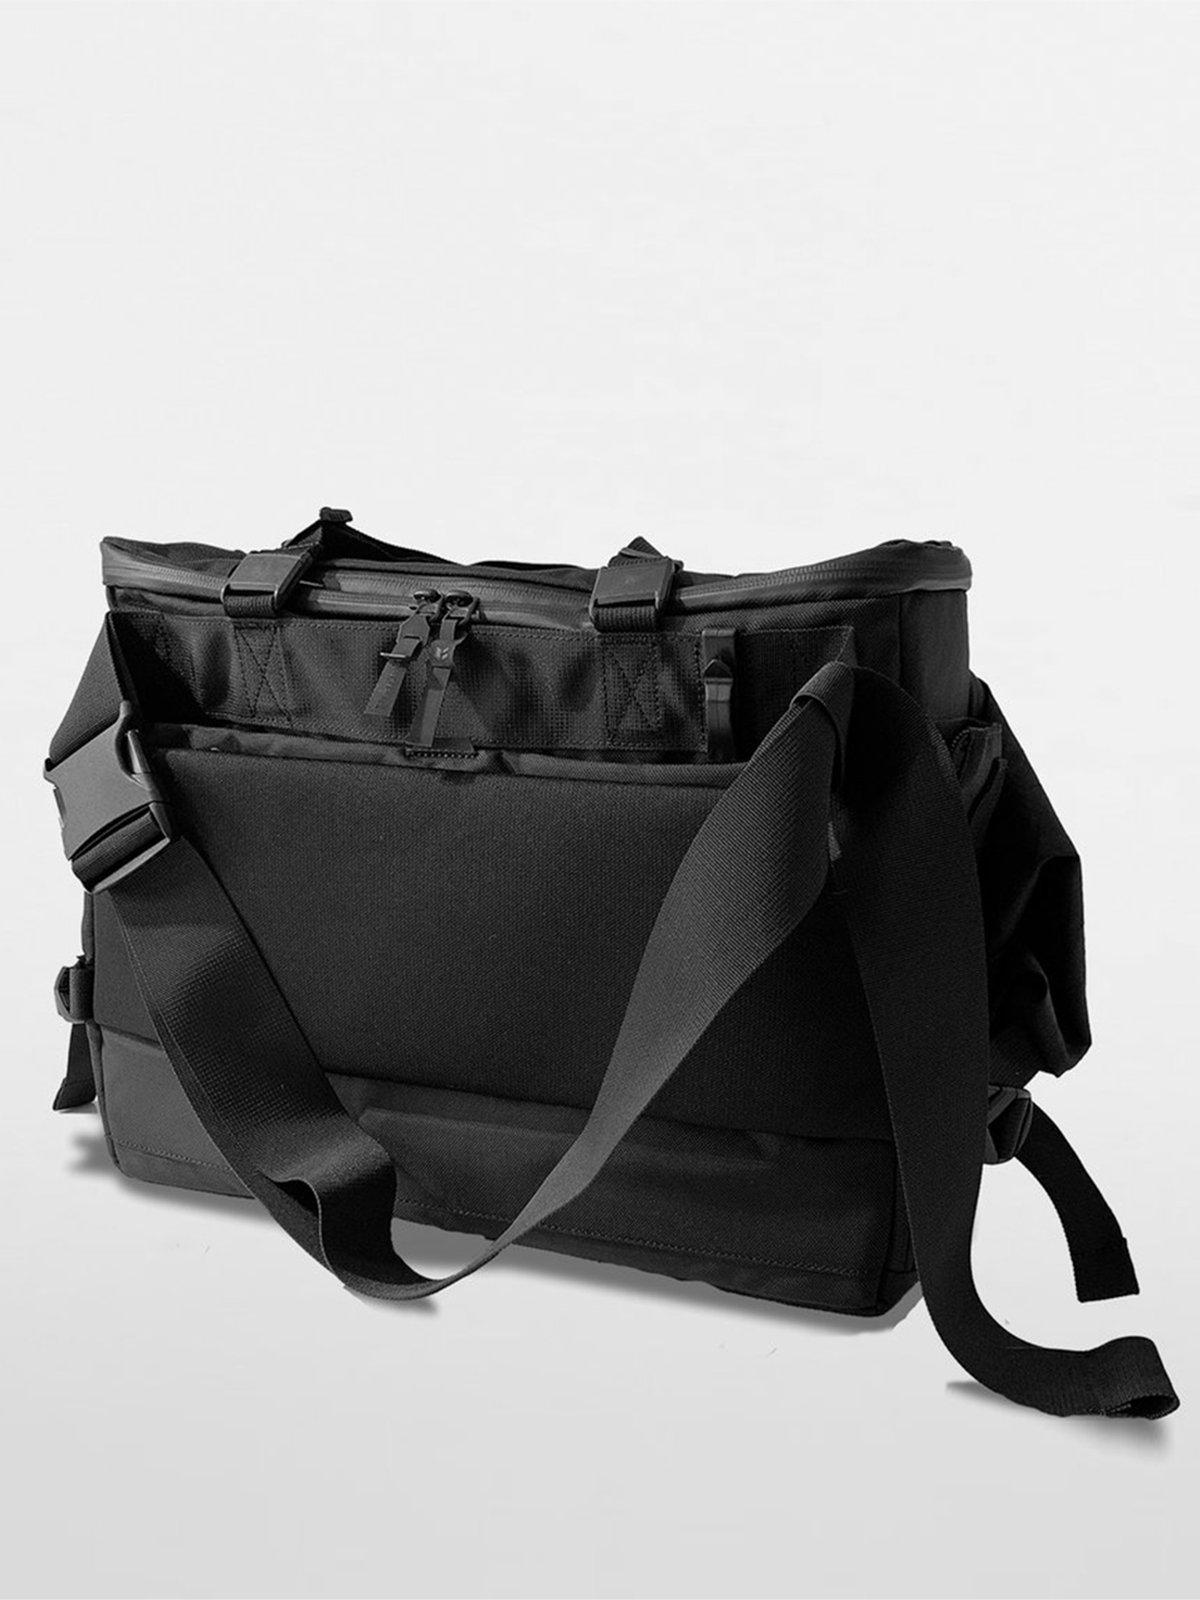 Code Of Bell X-TOTE 3 Way Messenger Tote Pitch Black